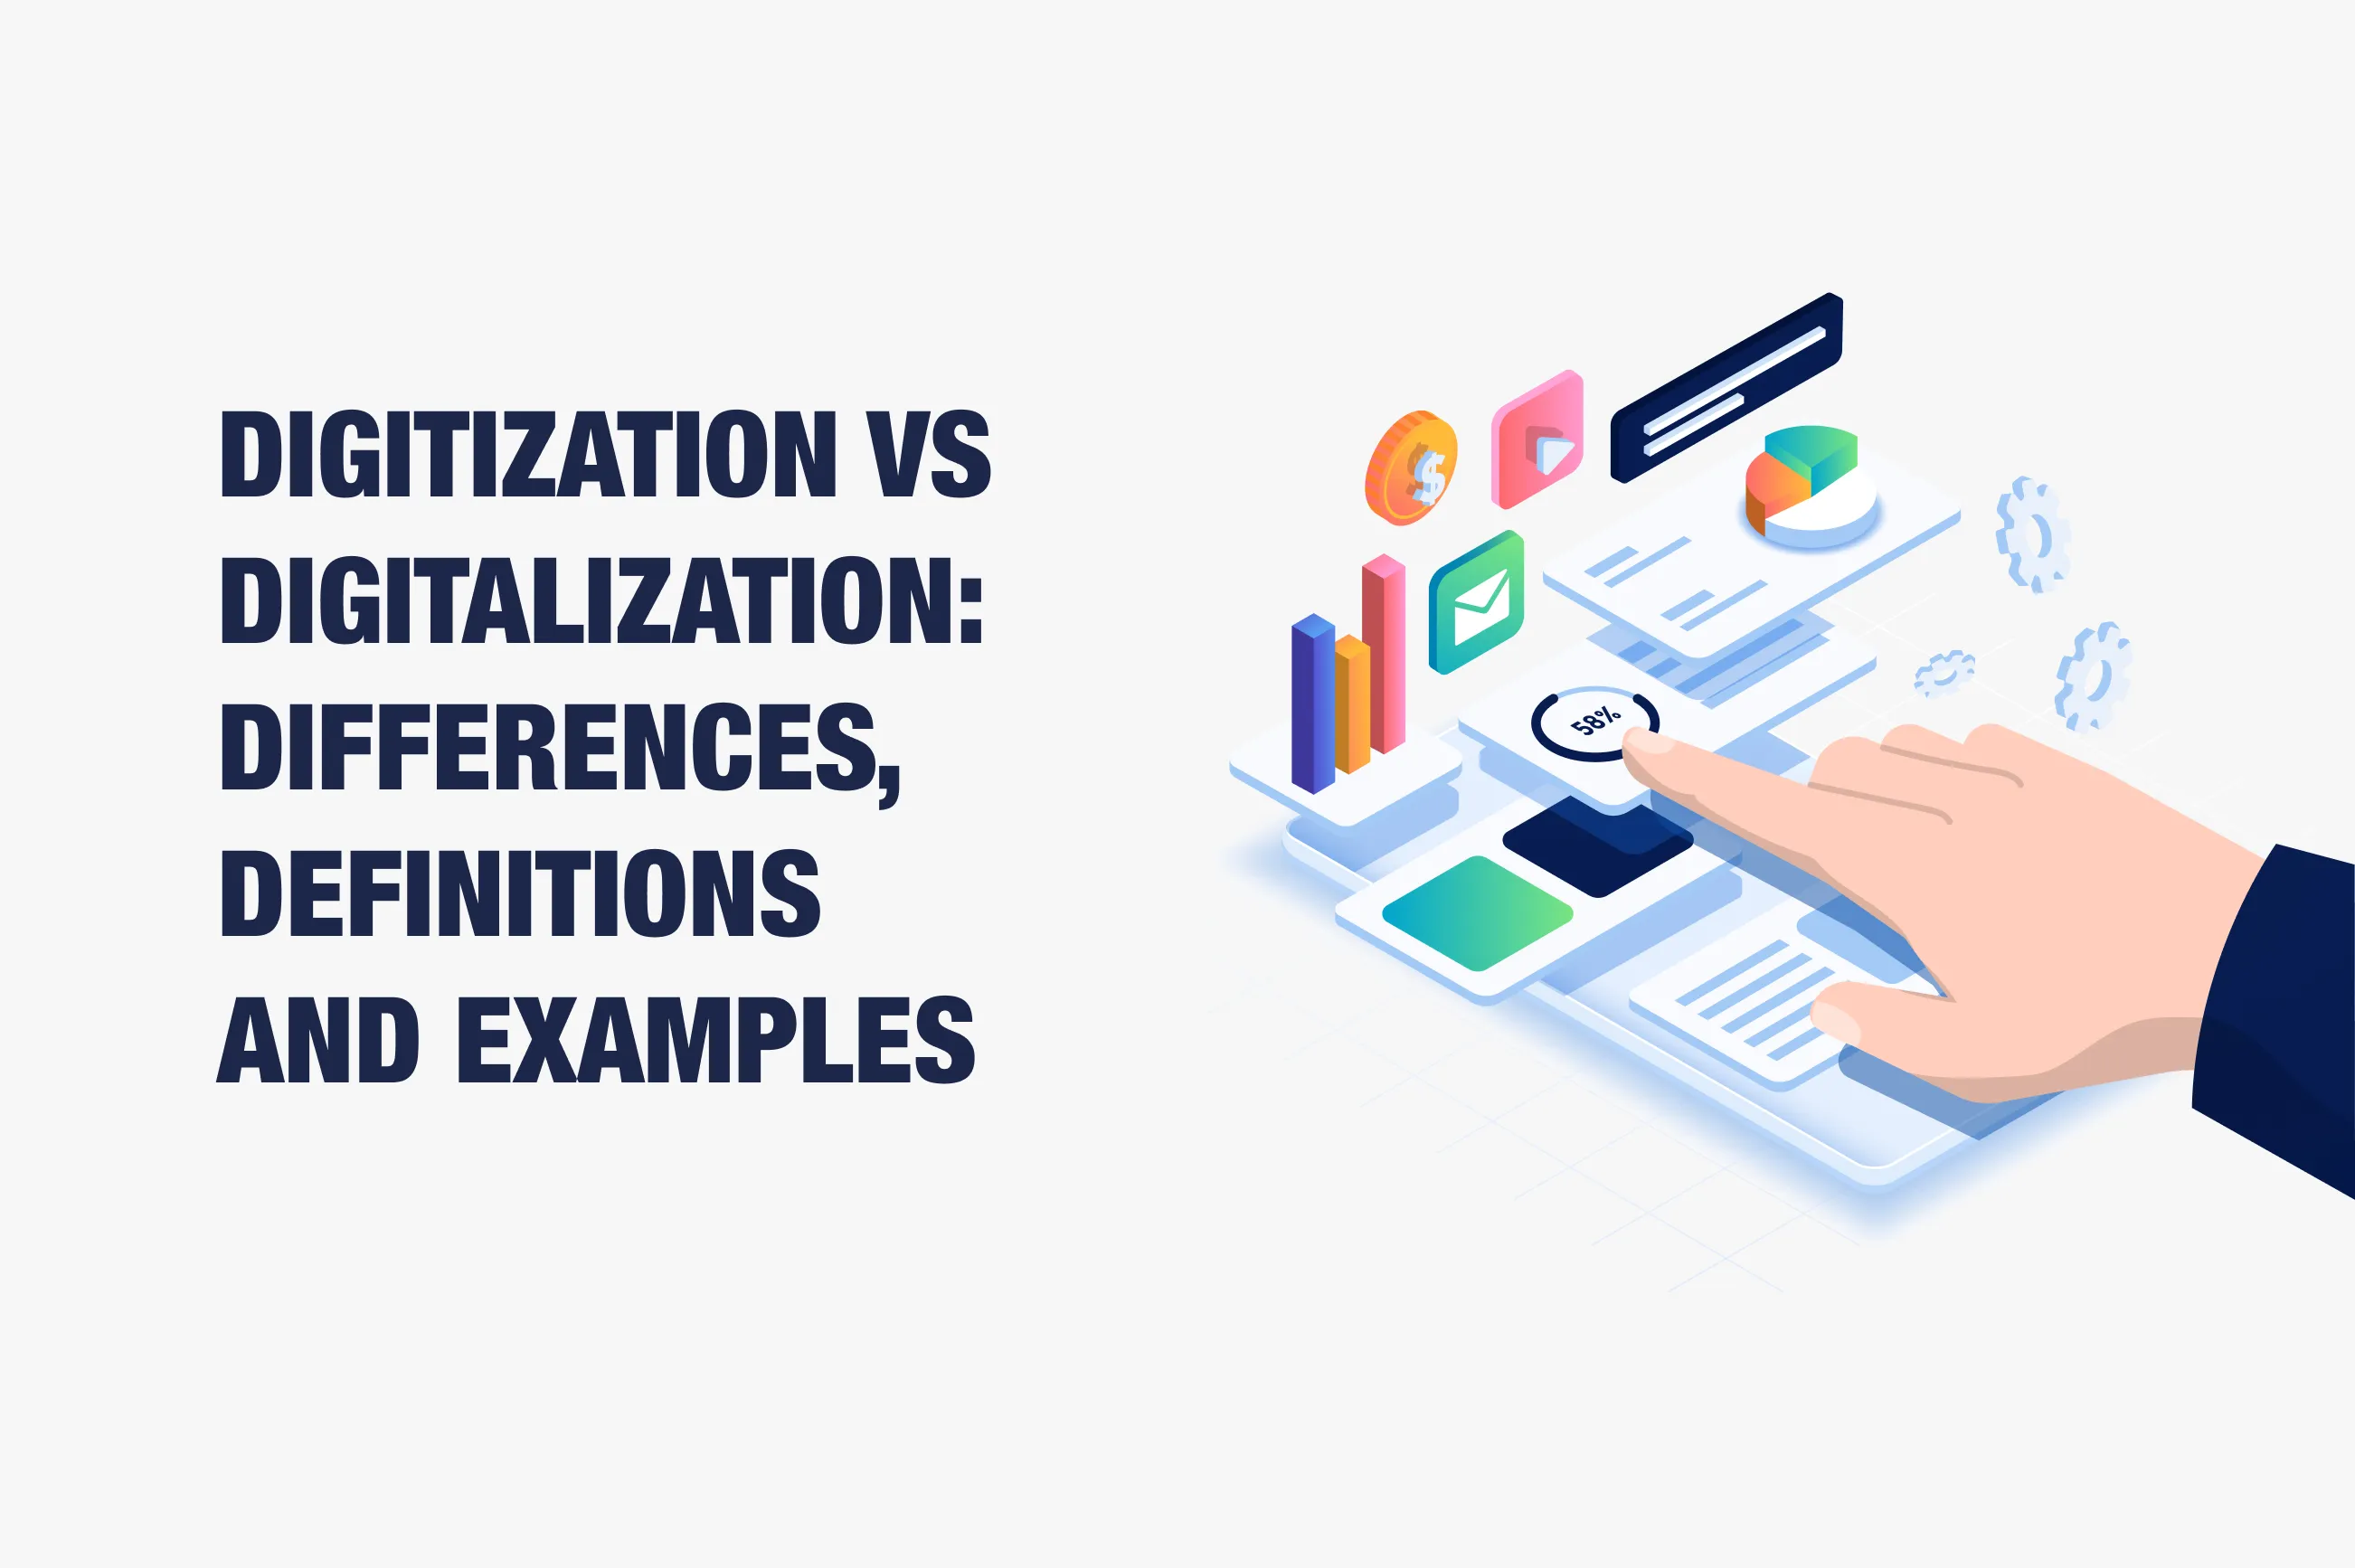 What is the Difference Between Digitalization and Digitization?